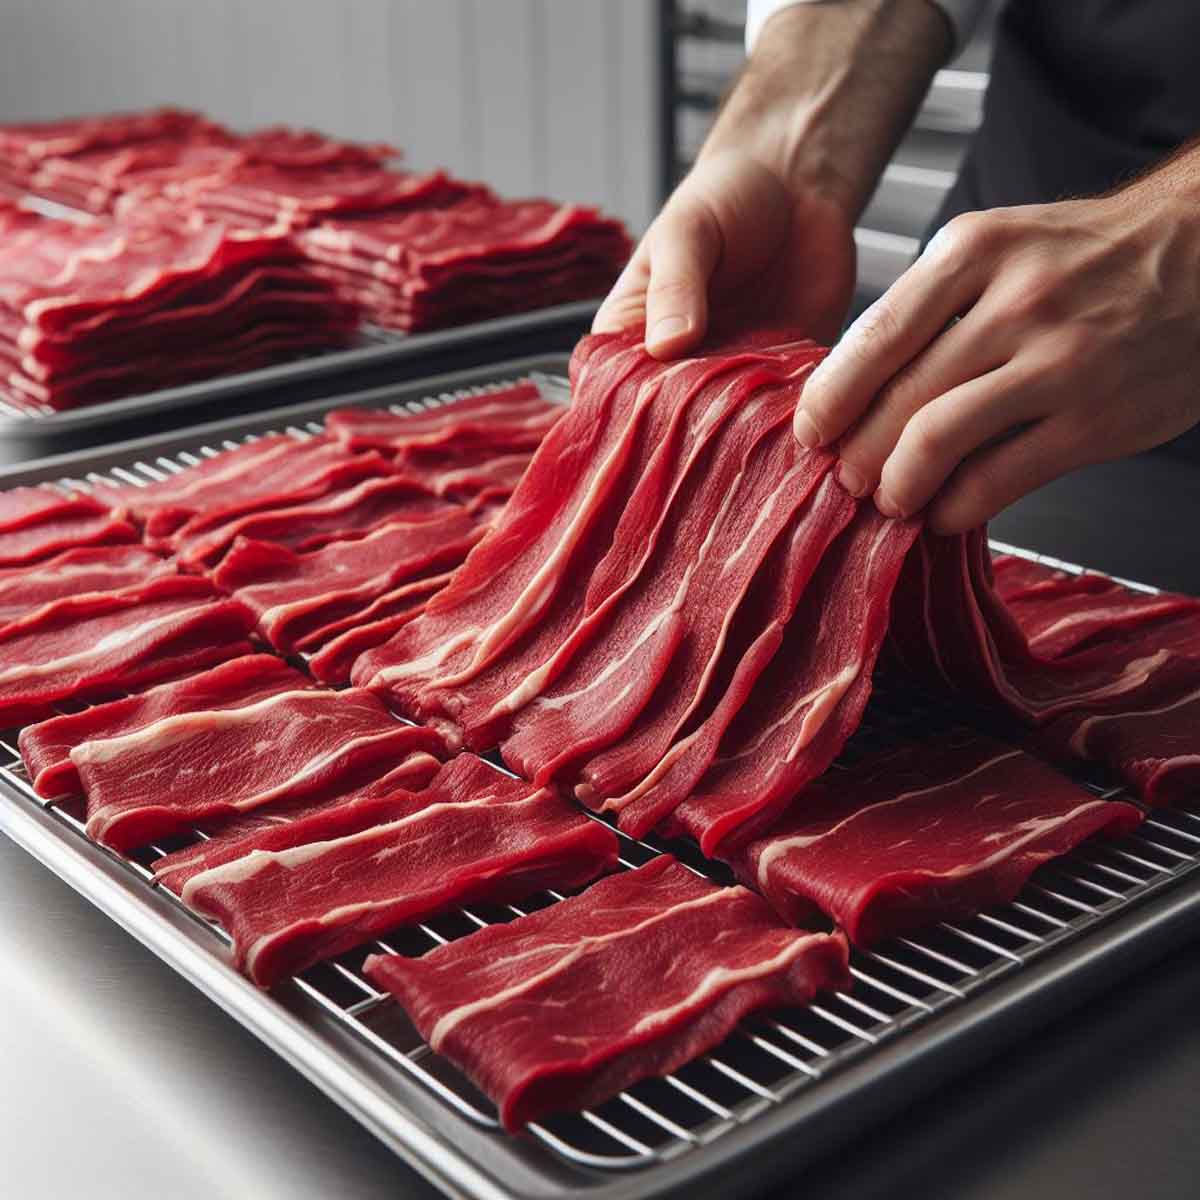 Thin strips of raw beef prepared for drying, laid out on a dehydration rack.